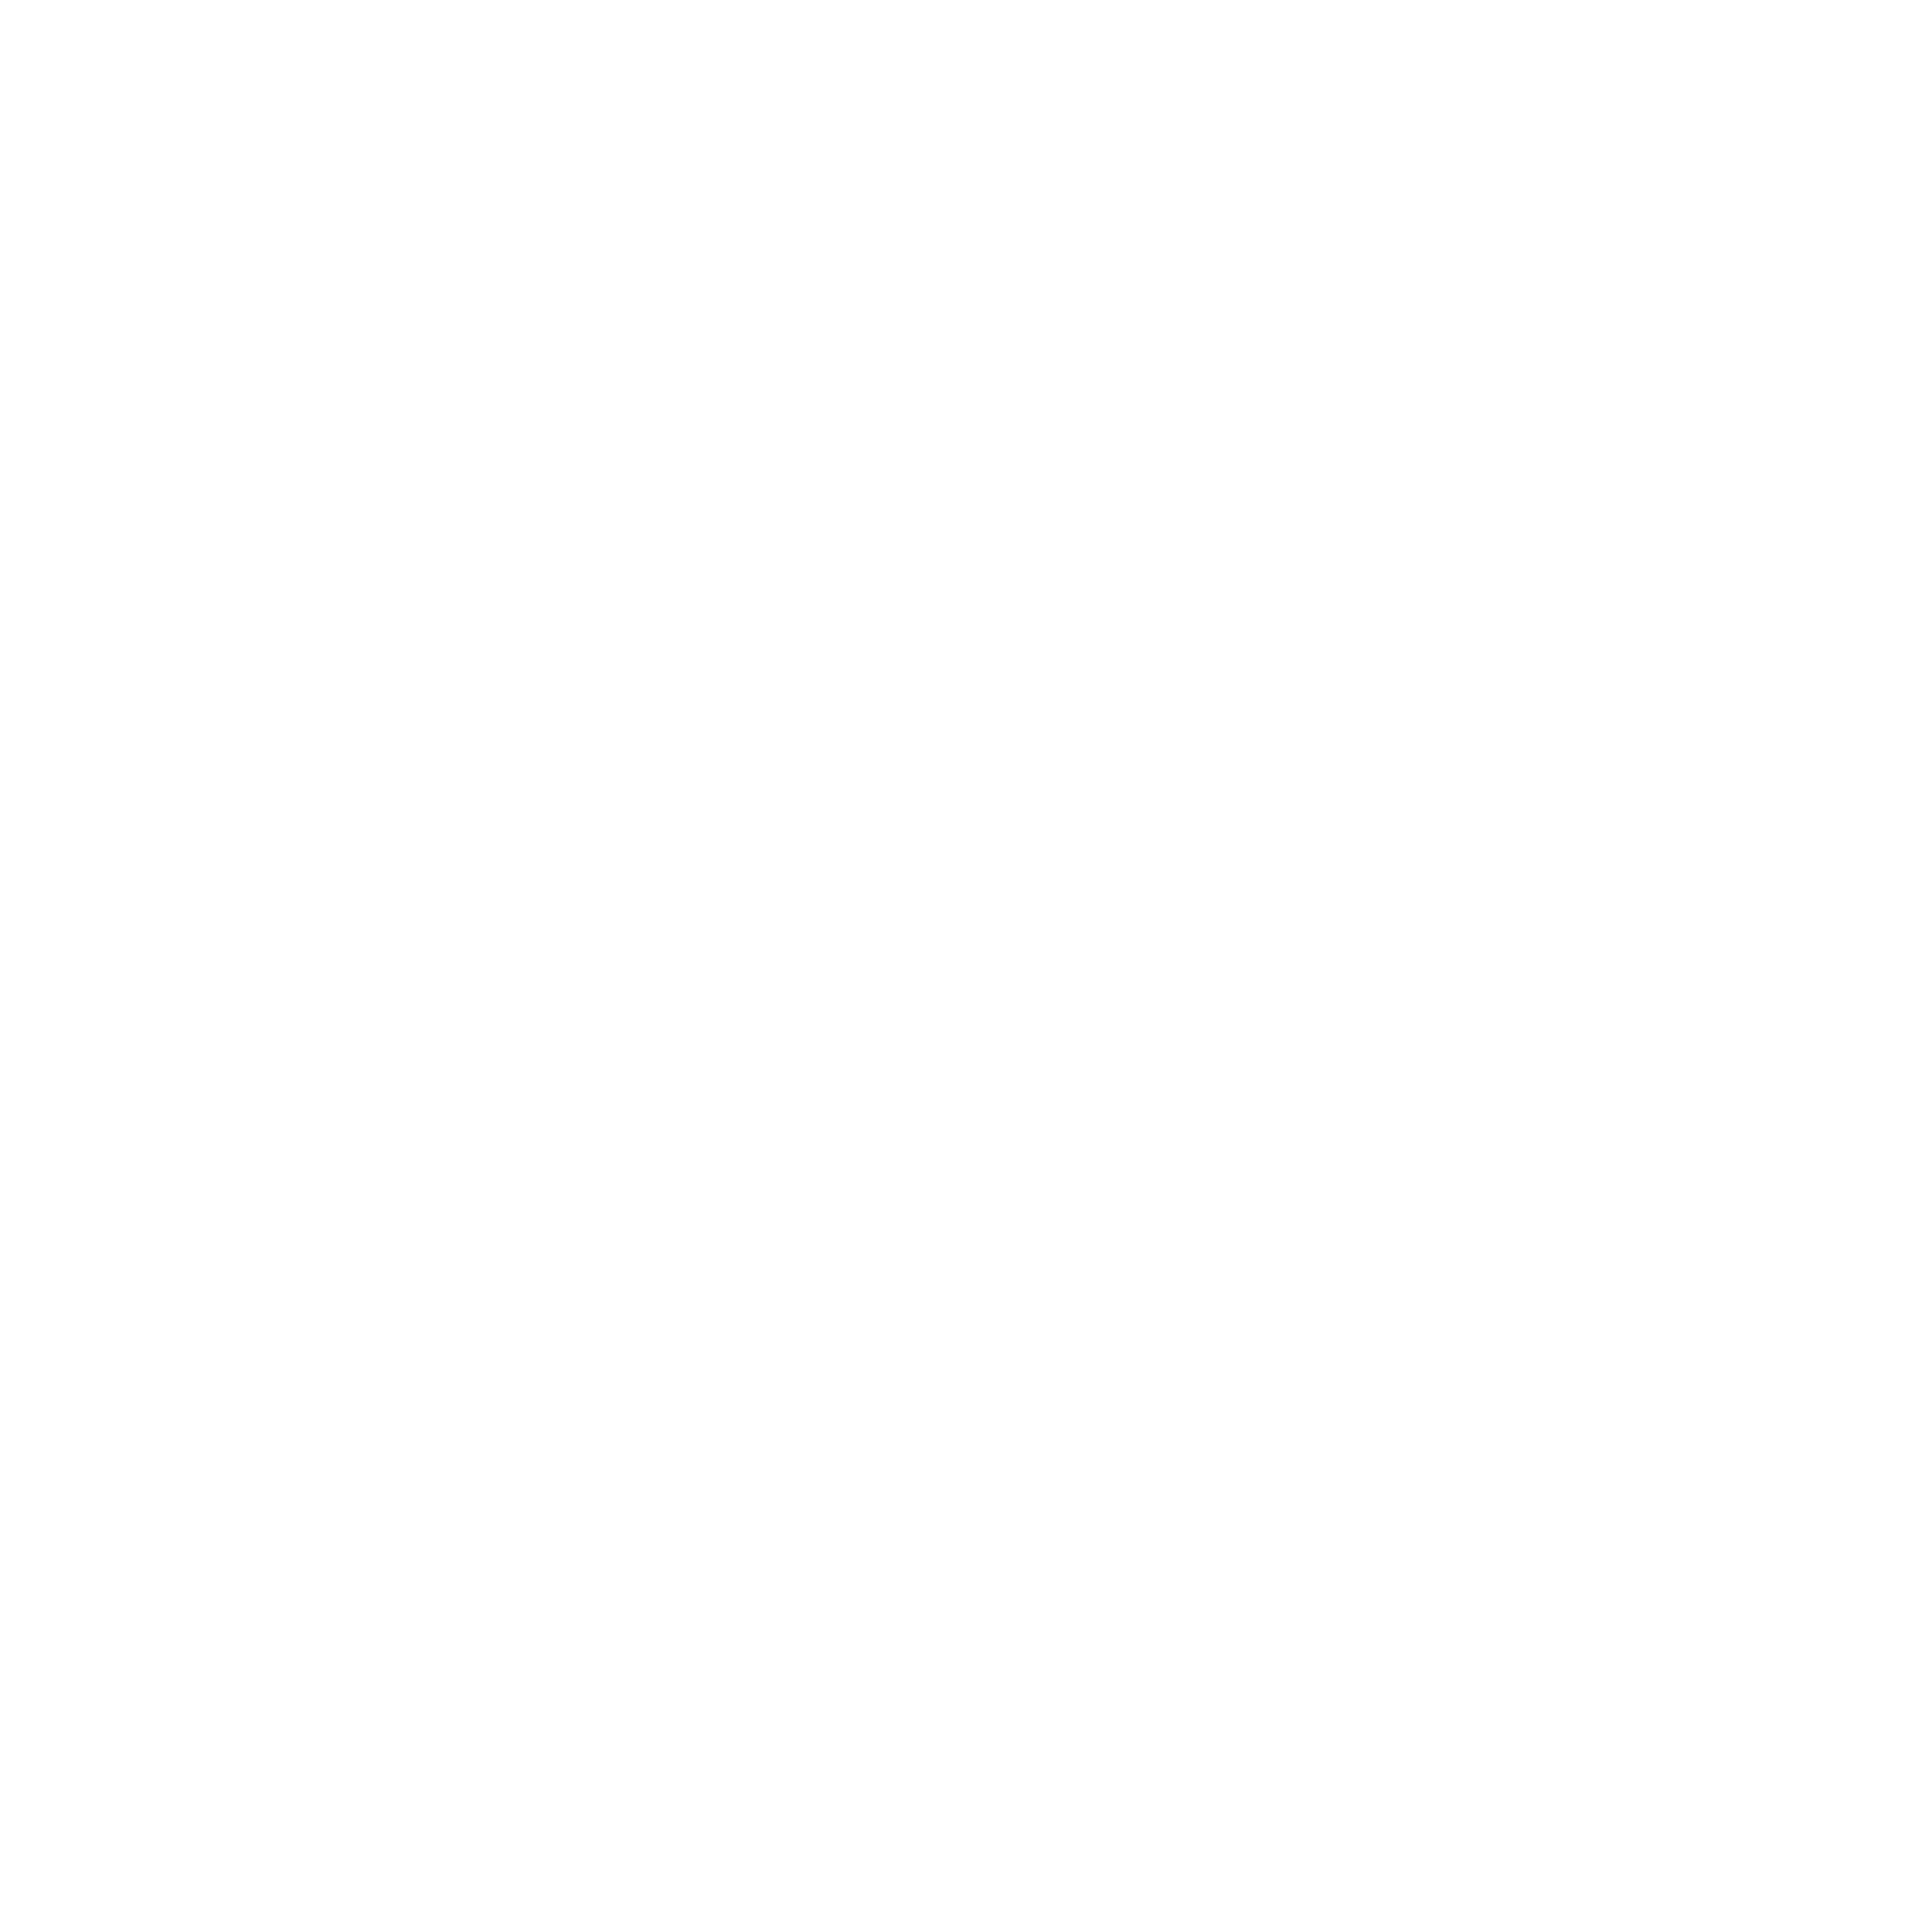 Sapphire_White_Transparency2.png